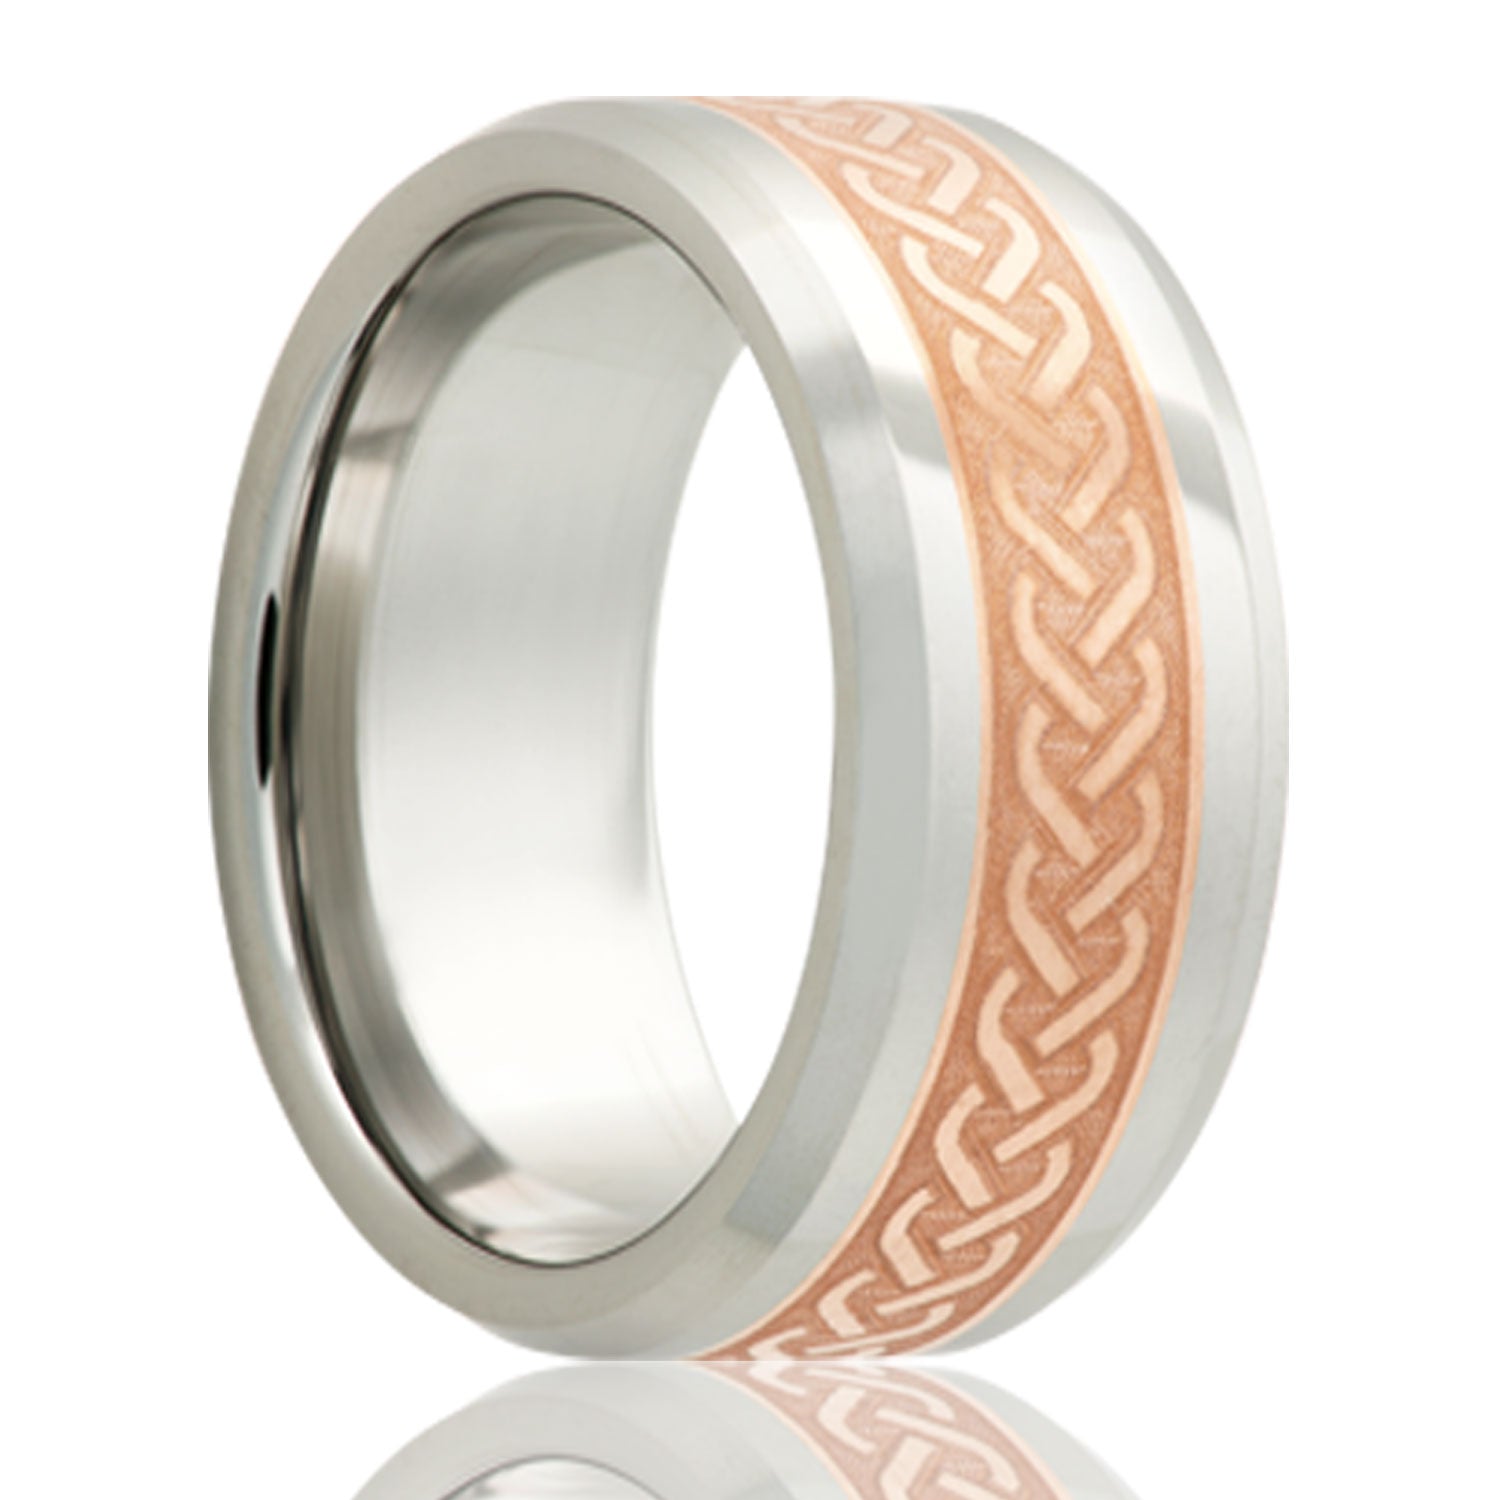 A celtic pattern copper inlay cobalt men's wedding band with beveled edges displayed on a neutral white background.